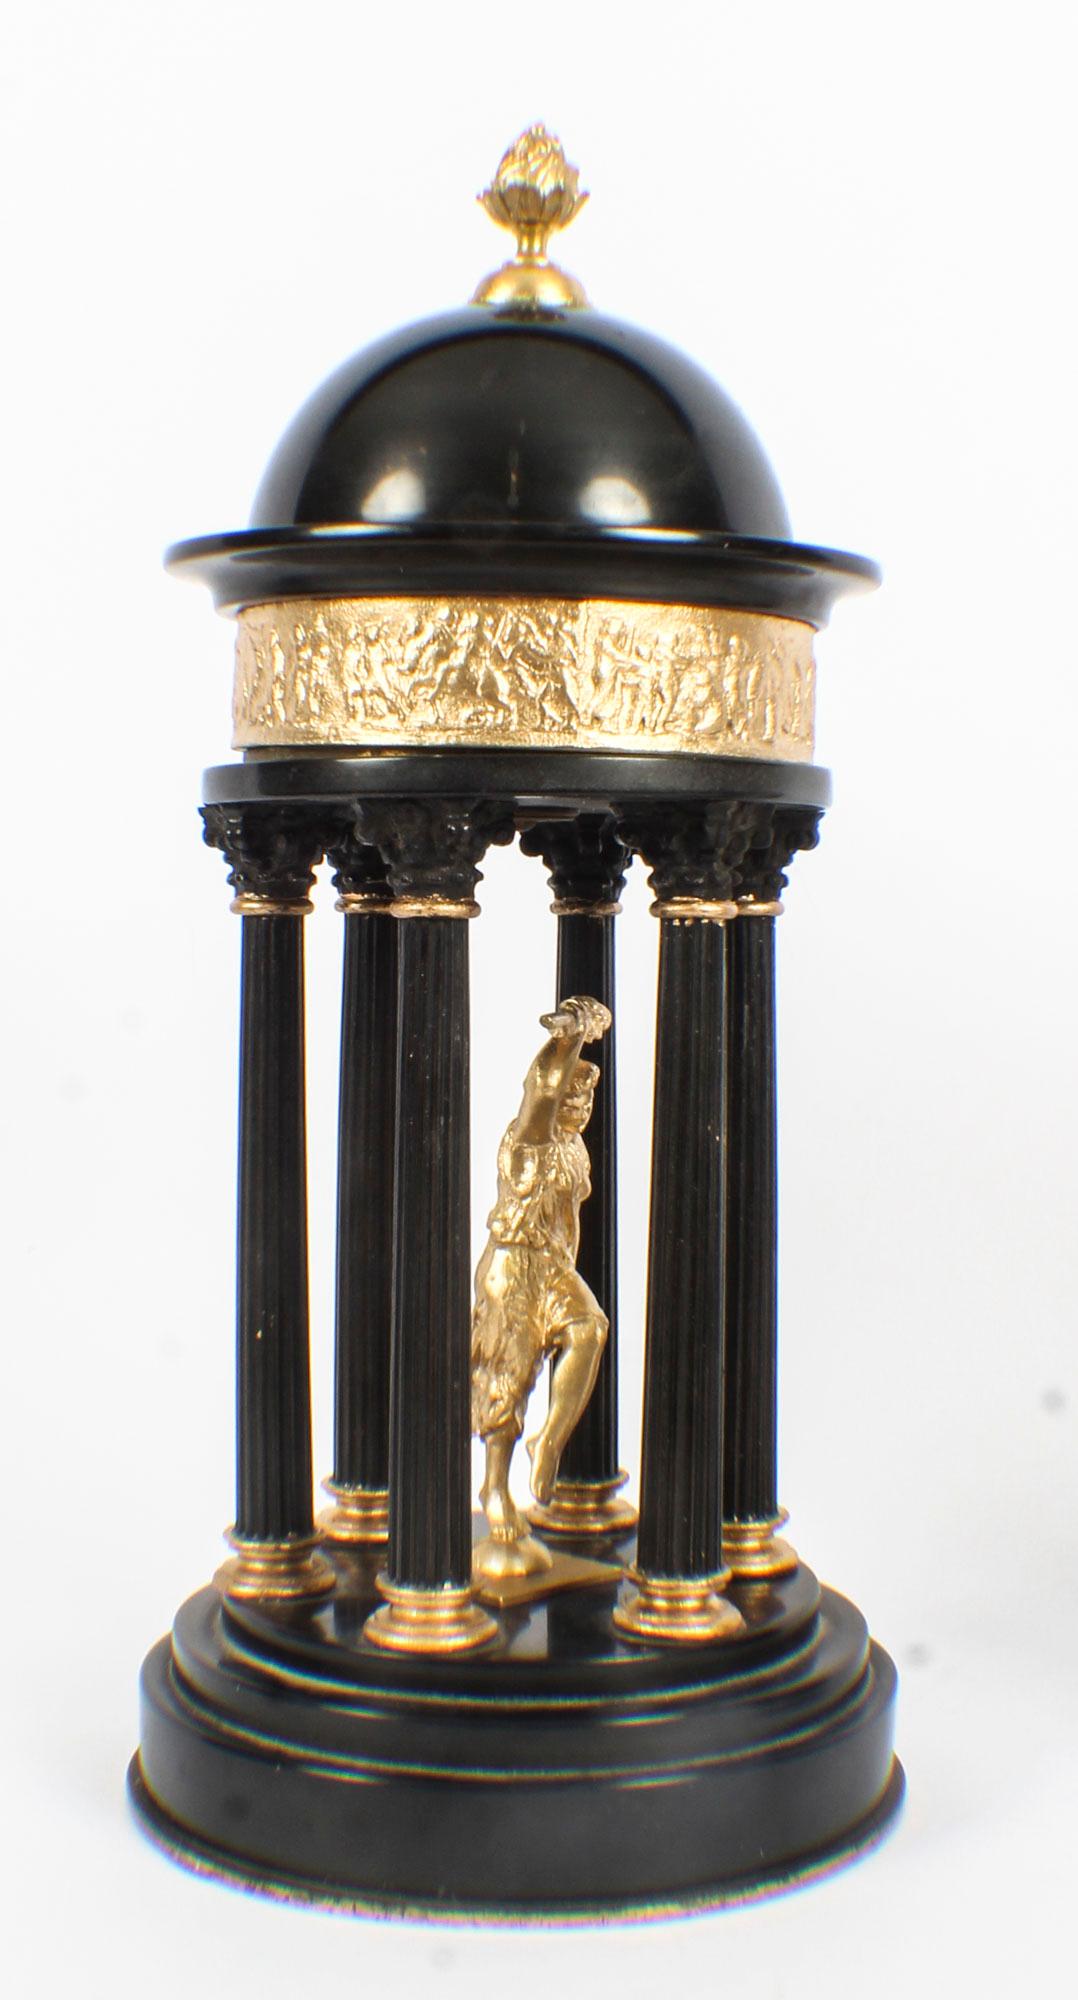 Antique Pair of Grand Tour Marble & Ormolu Colonnade Temple Models, 19th Century 5